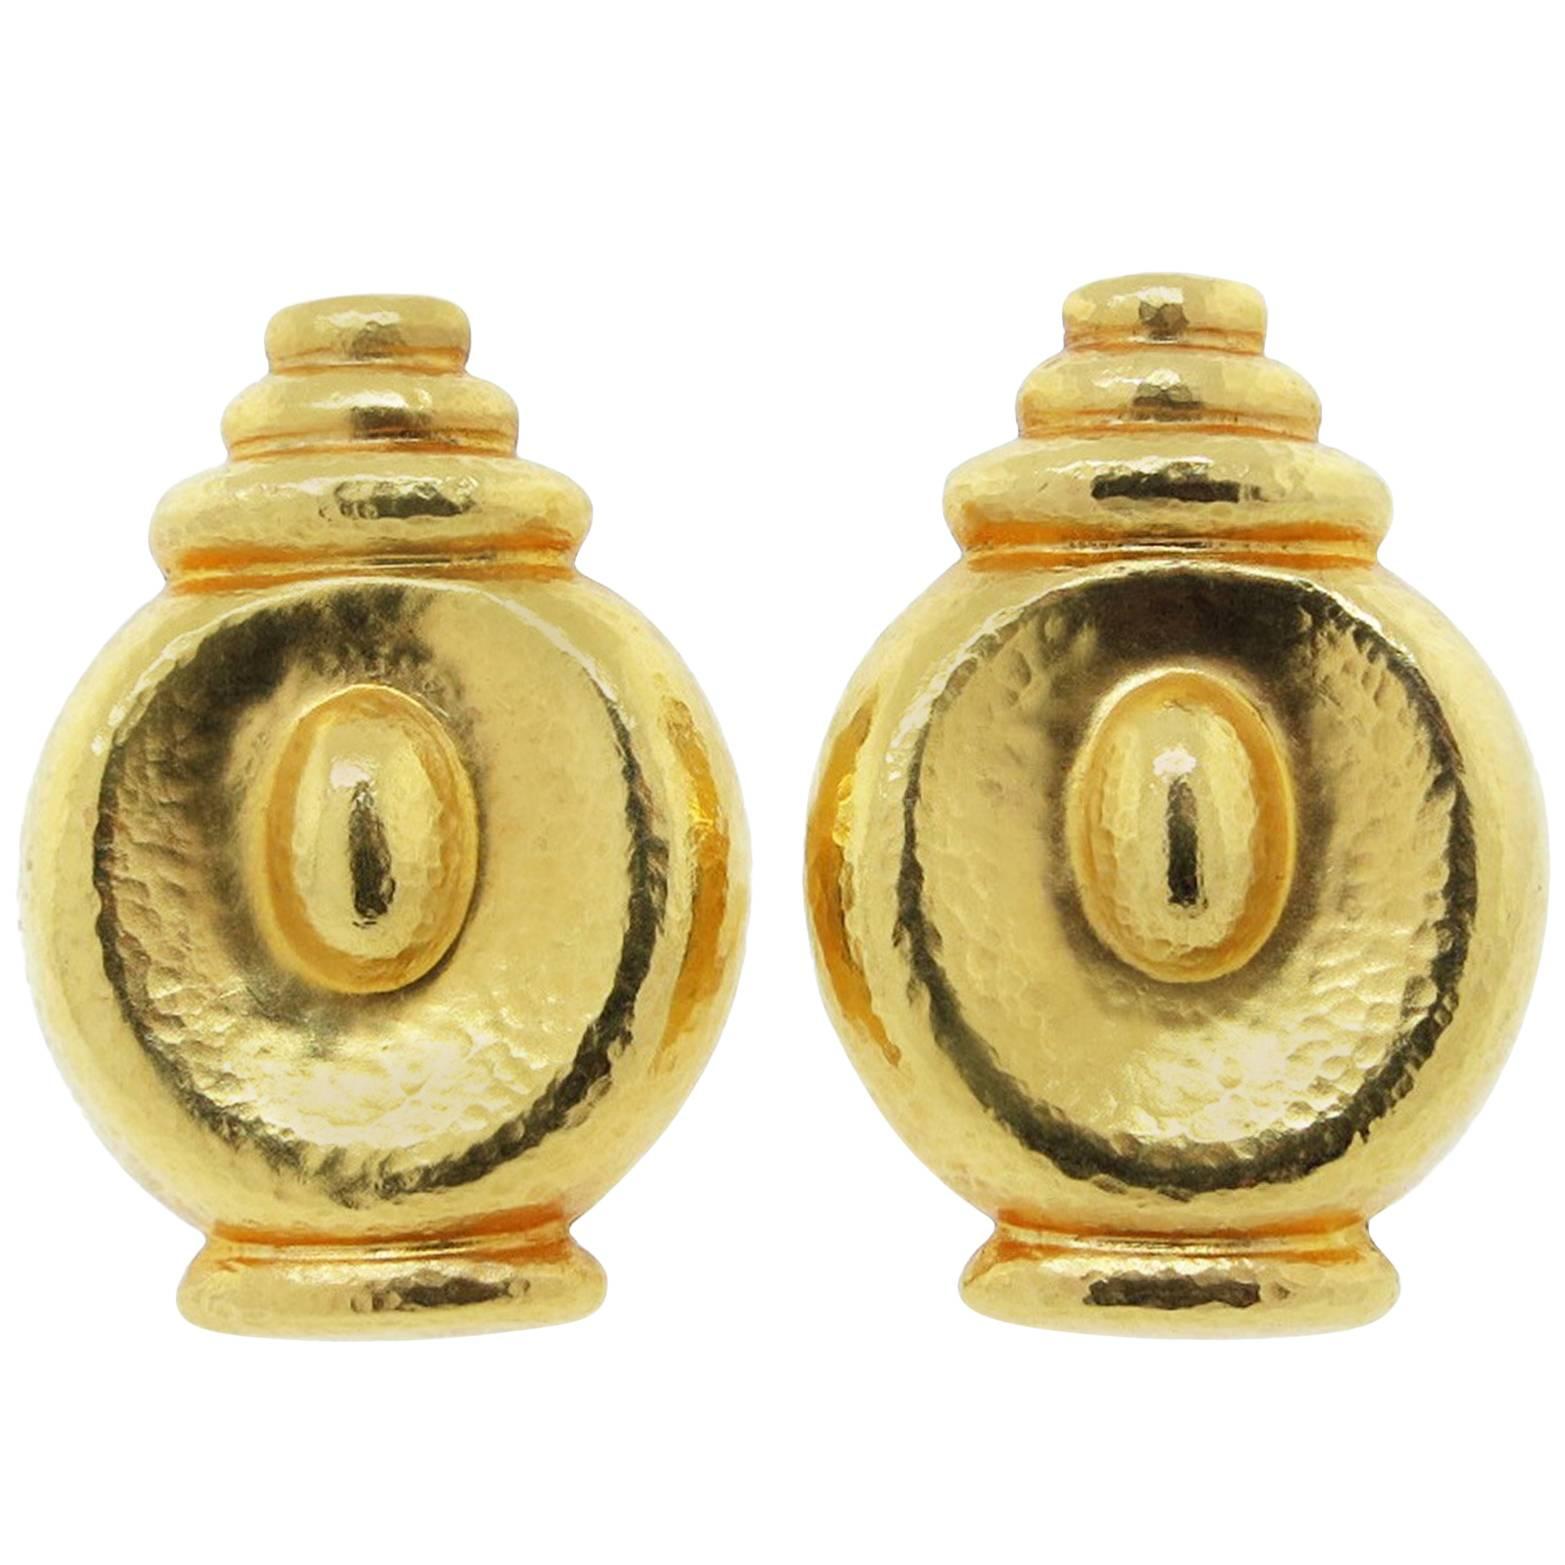 Neoclassical Design Lalaounis of Greece Urn Earrings